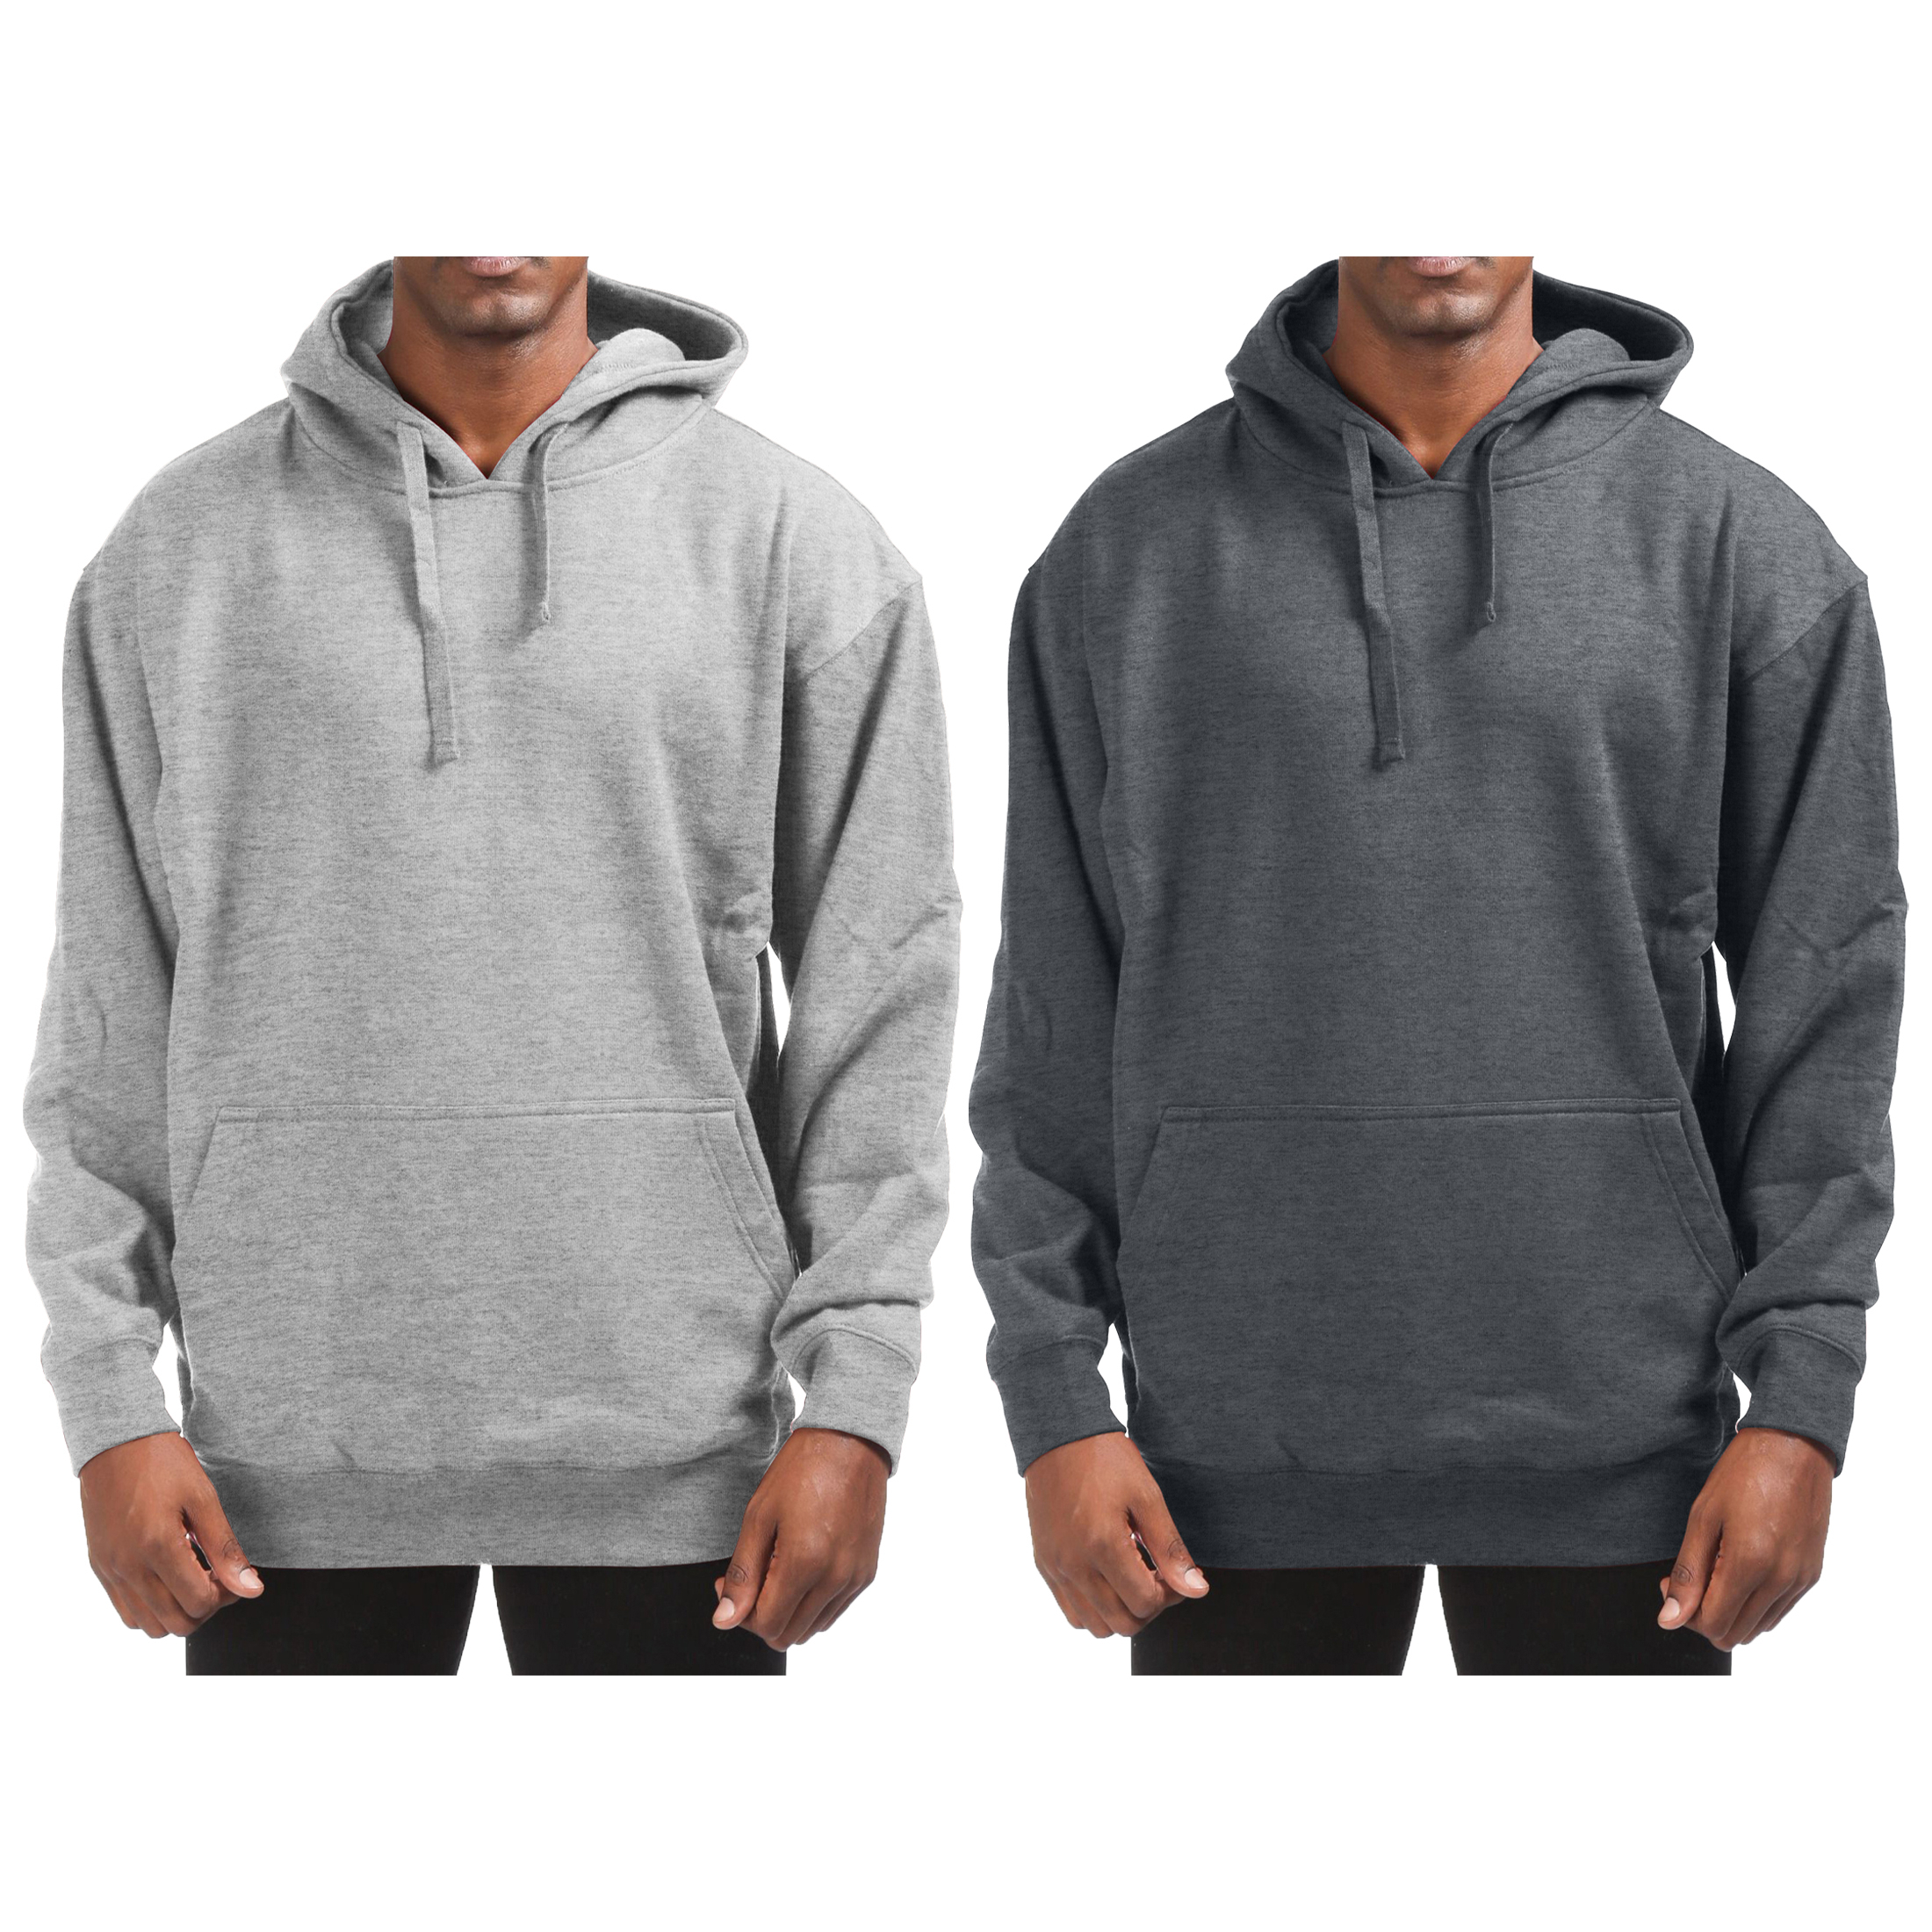 1-PACK Men's Cotton-Blend Fleece Pullover Hoodie With Pocket - 4XL